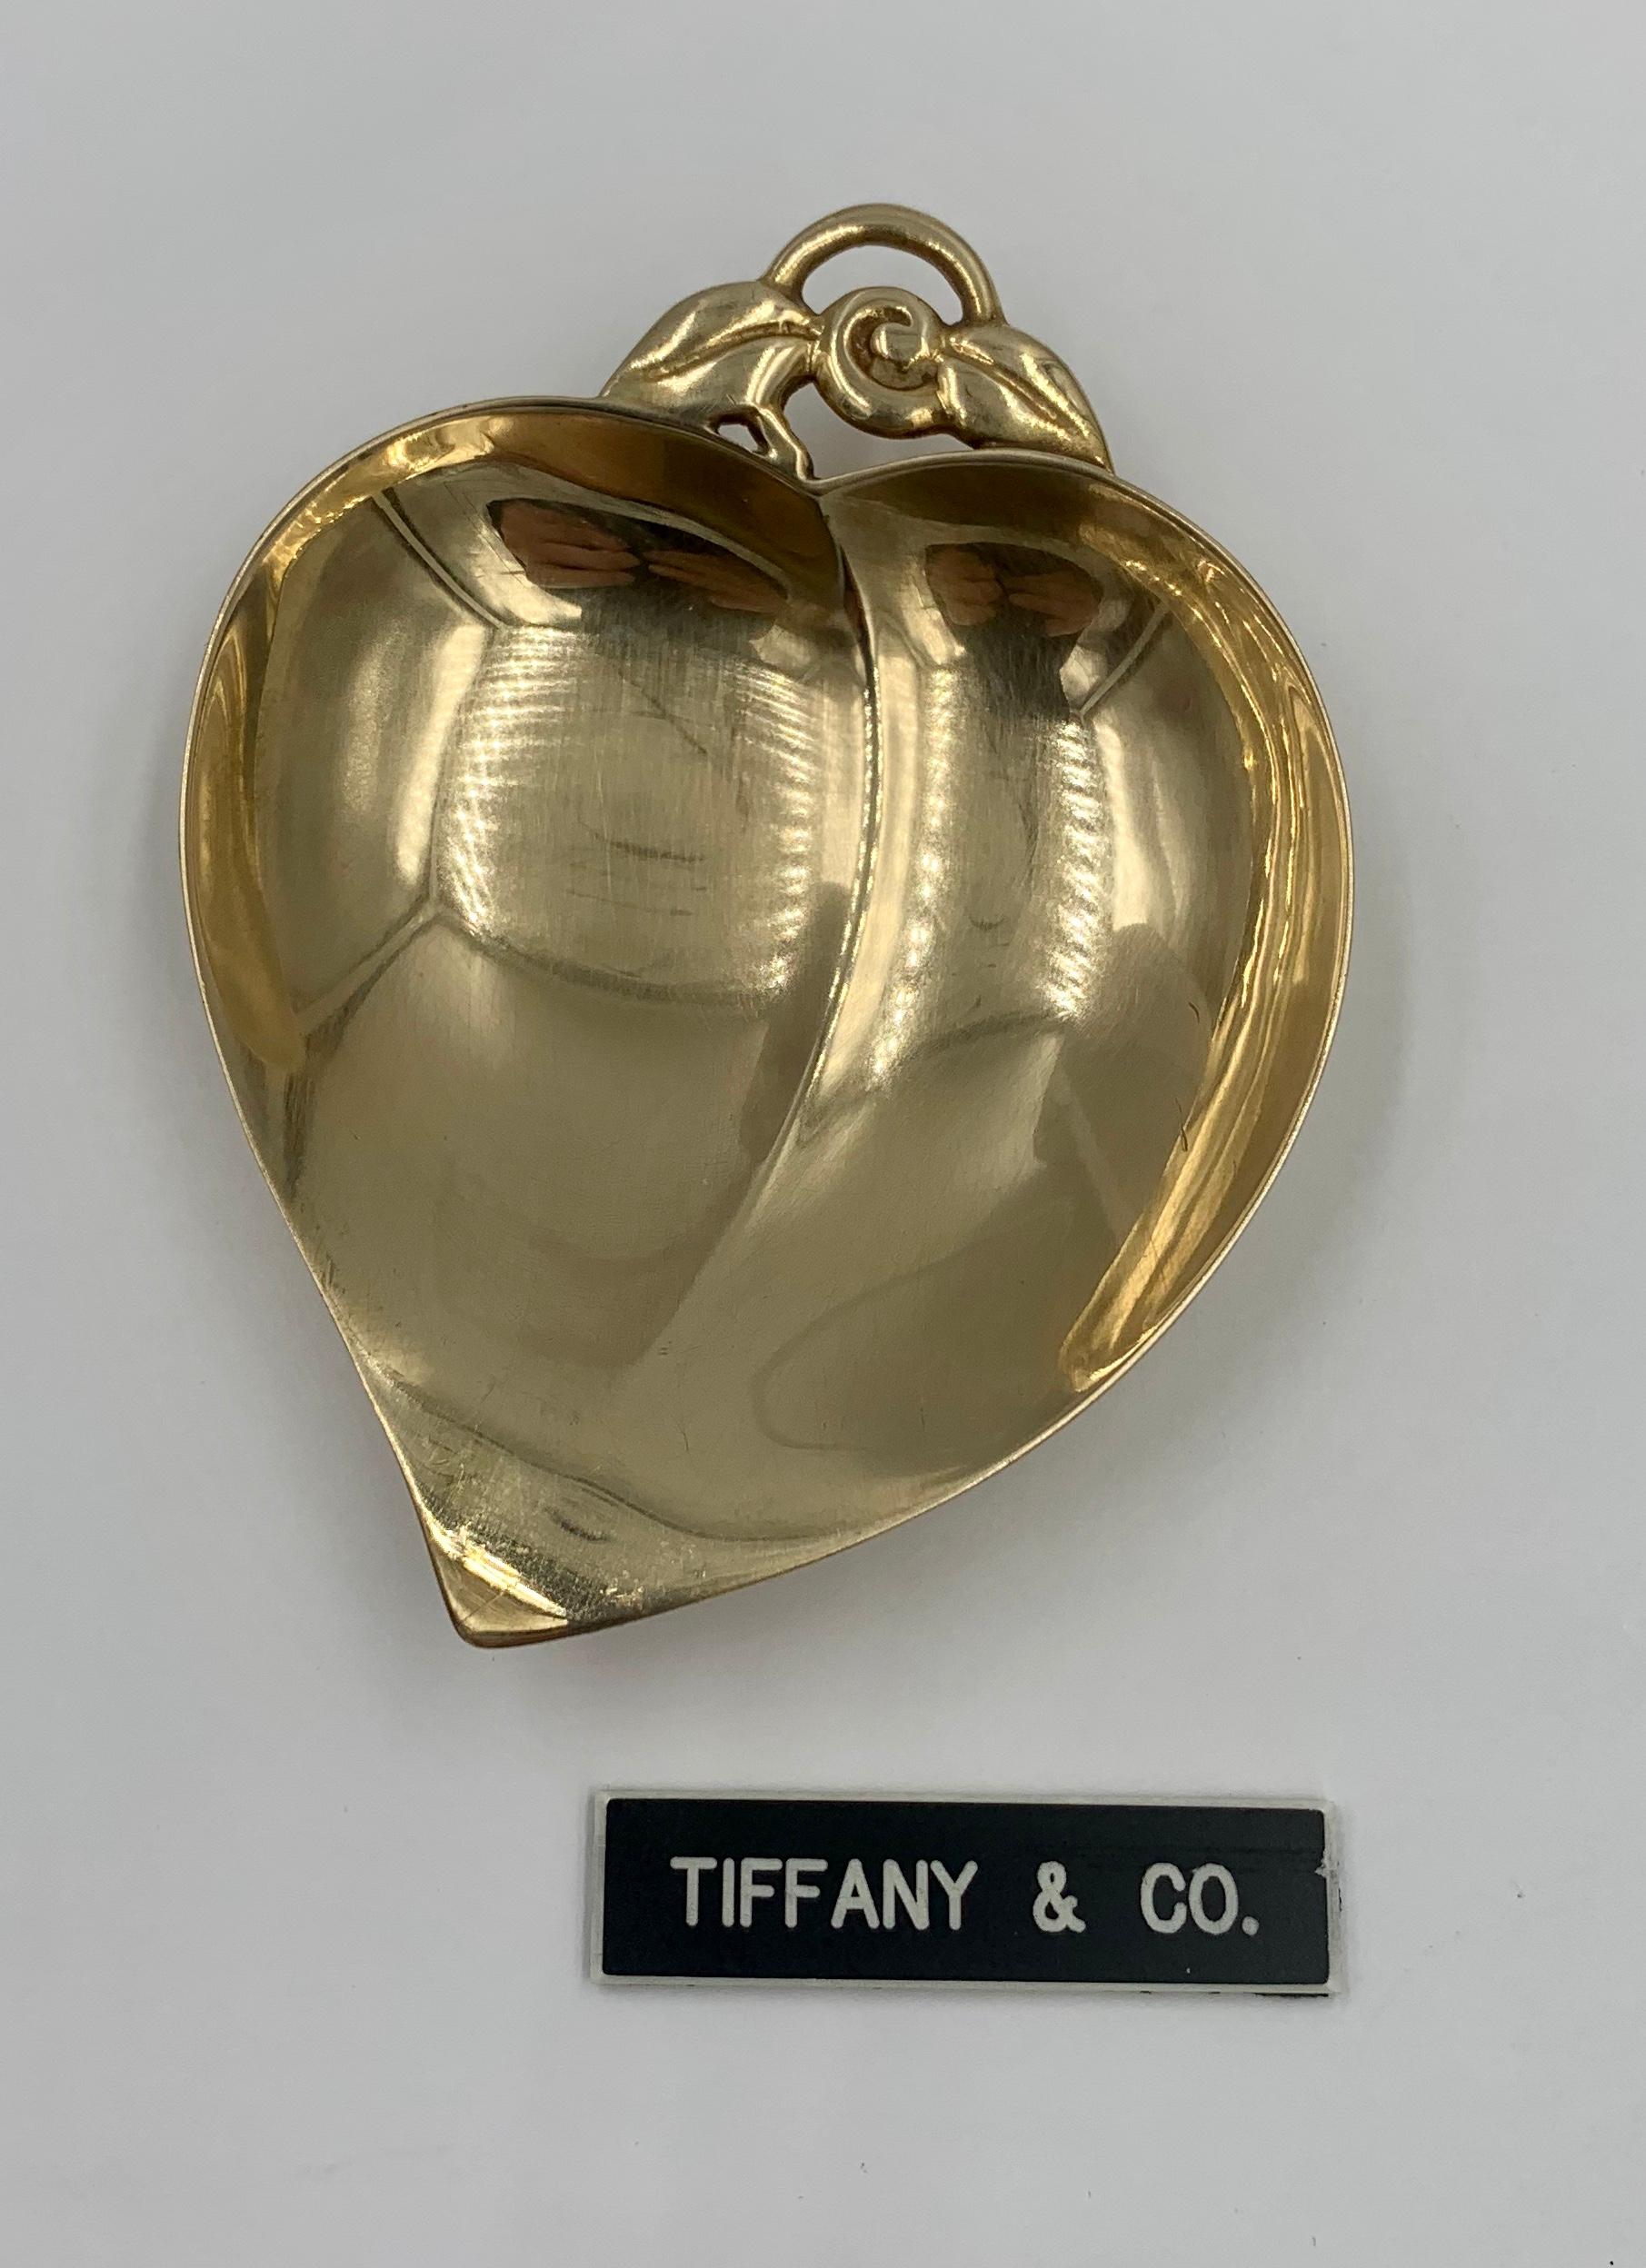 A very rare Antique Tiffany & Co. 14 Karat Yellow Gold Leaf Motif Bowl.  The solid 14 Karat gold bowl is hallmarked TIFFANY & CO MAKERS 14KT GOLD, 22886, an italic M, with engraved number 4049.  The italic M mark dates the Tiffany bowl to 1907 -